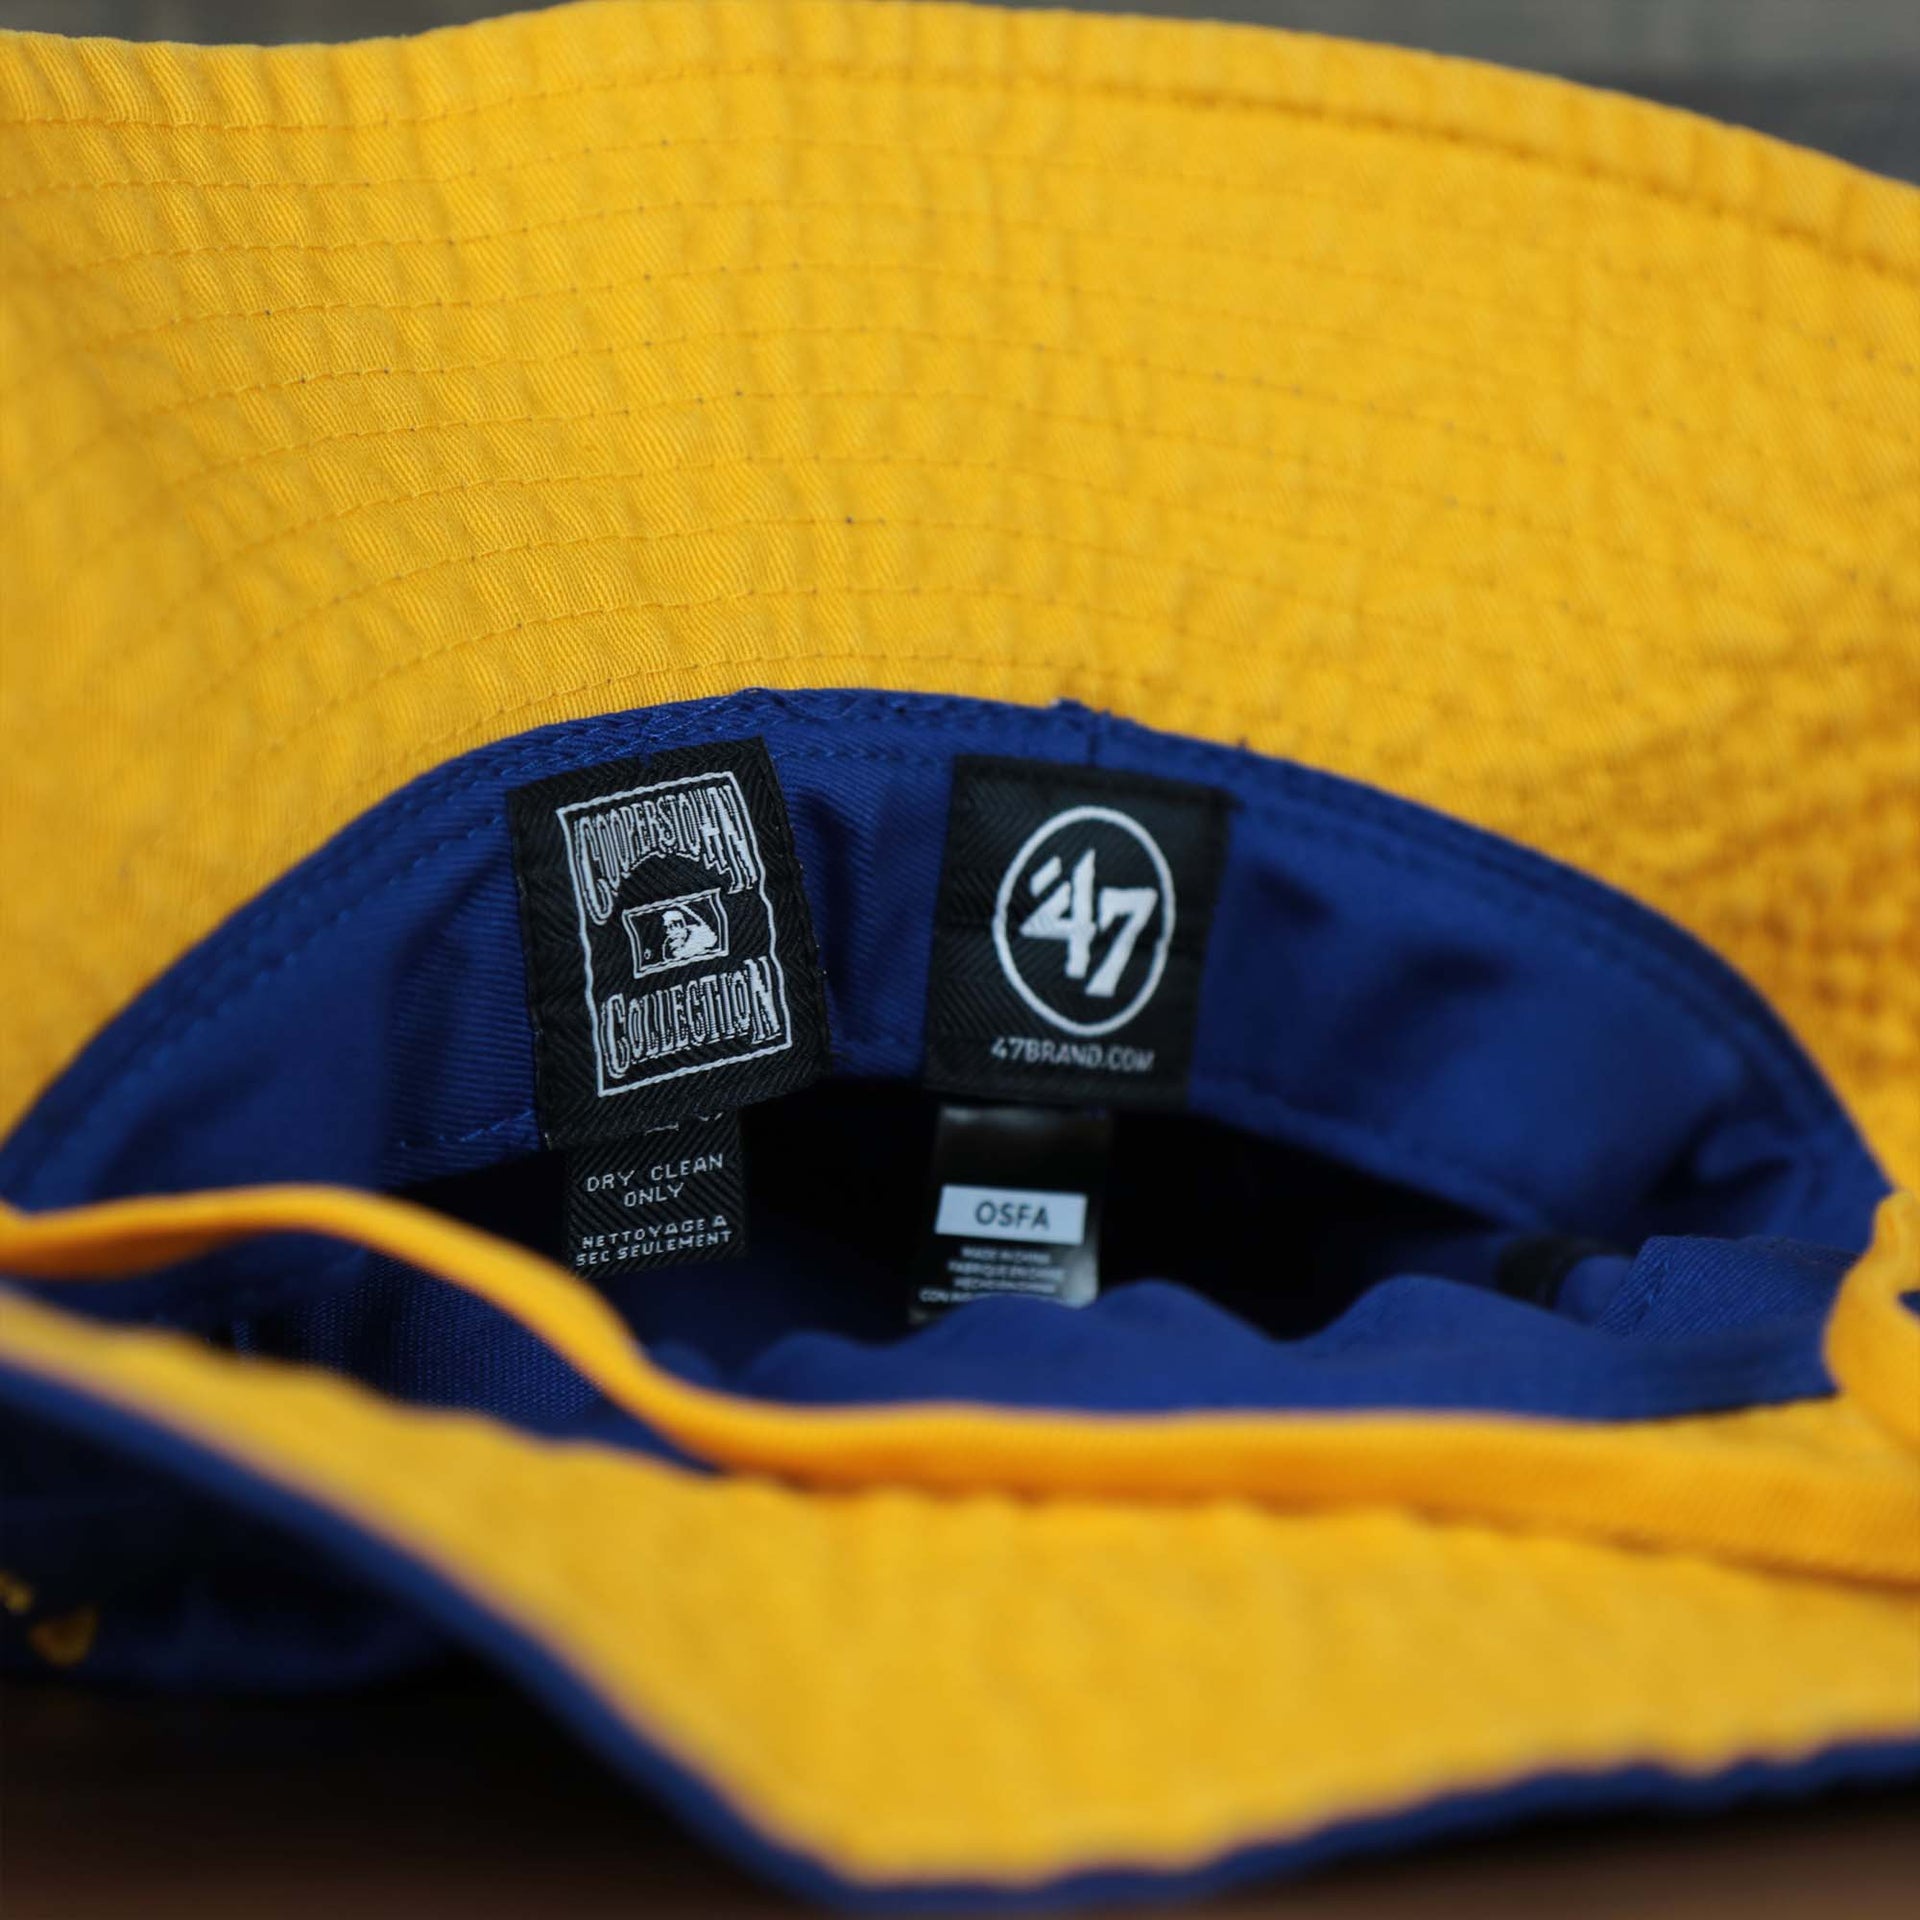 The tags on the Philadelphia Athletics Cooperstown Vintage 50s Bucket Hat | 47 Brand, Royal